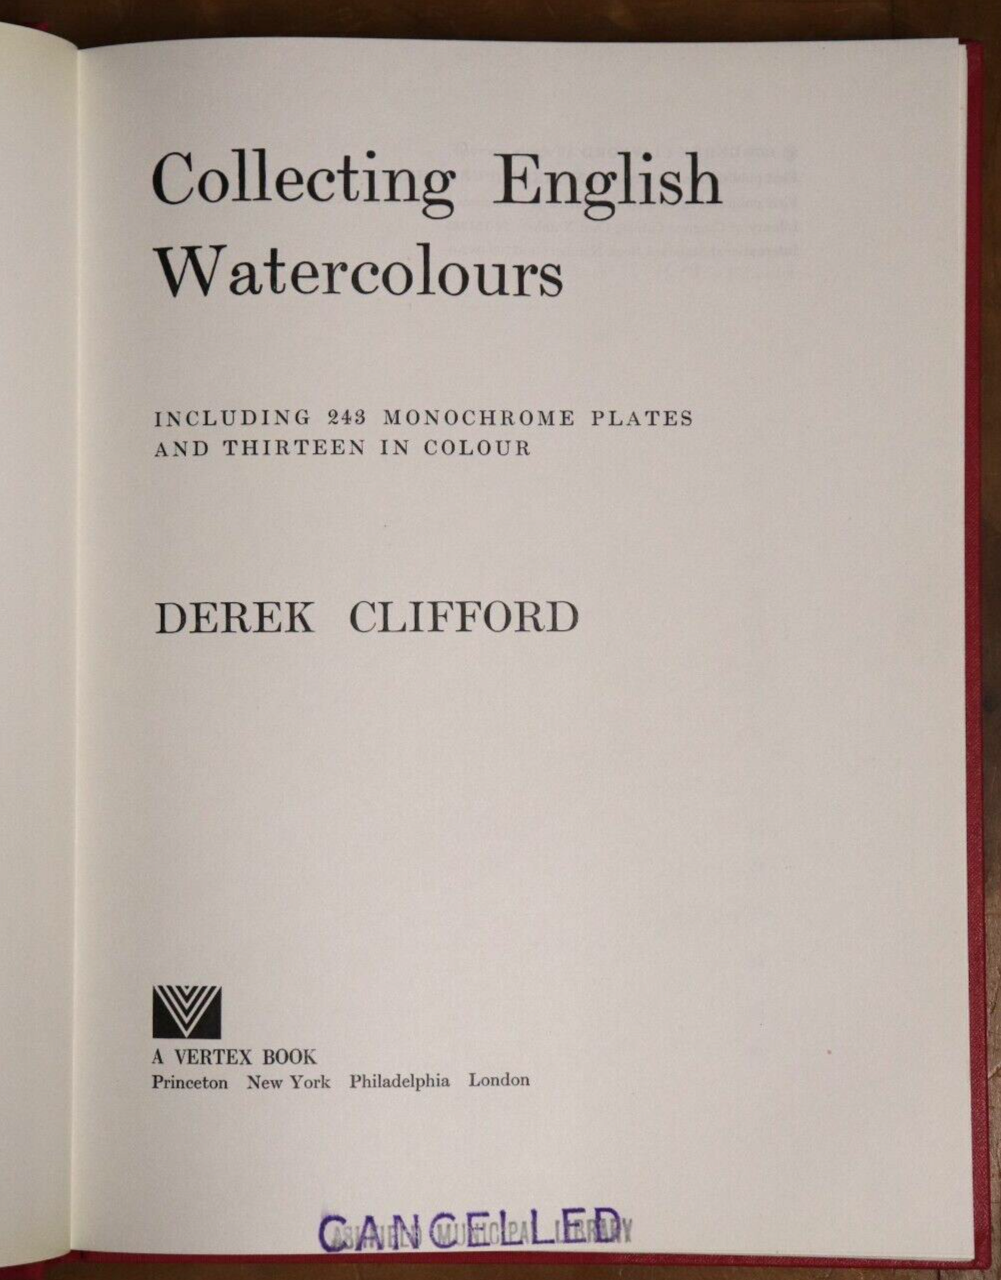 1971 Collecting English Watercolours by Derek Clifford Art Book - 0